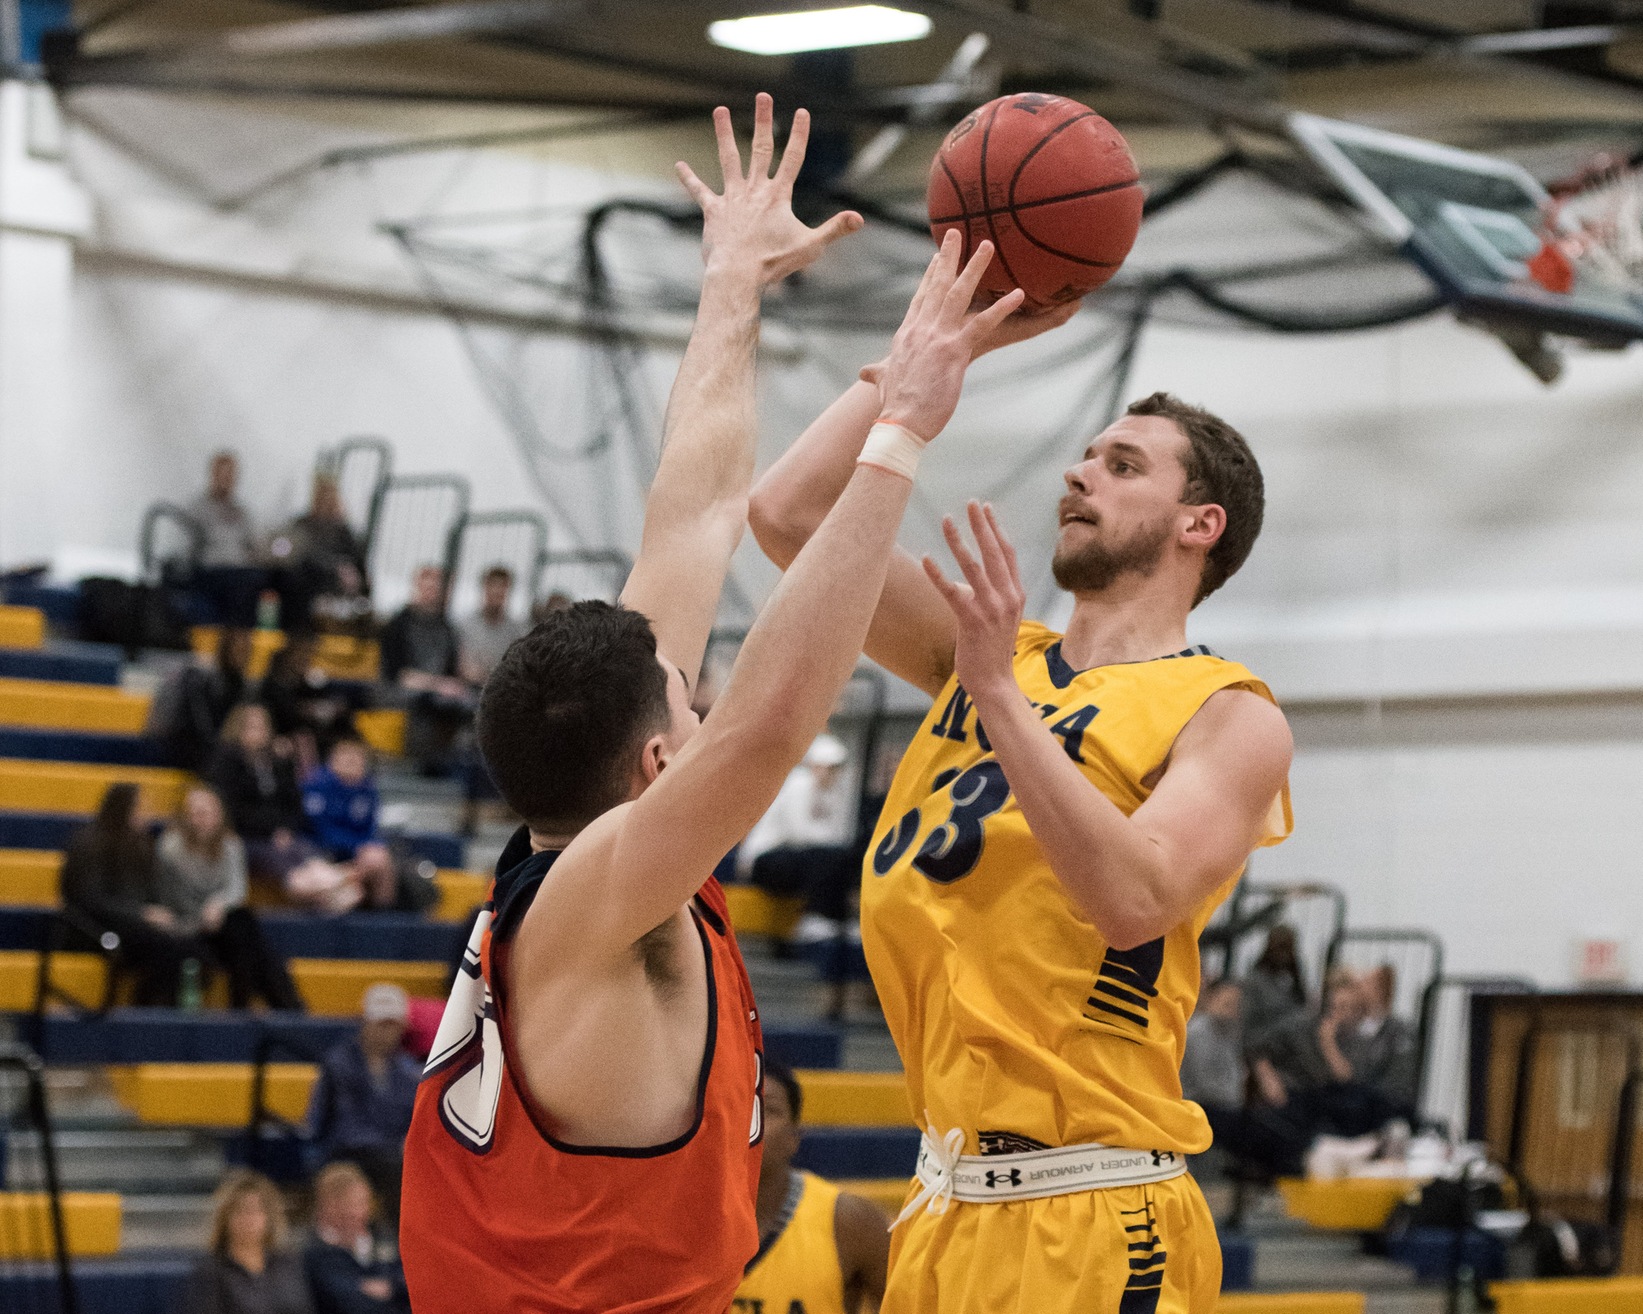 Men's Basketball earns third seed with Senior Day win over Framingham State 68-54